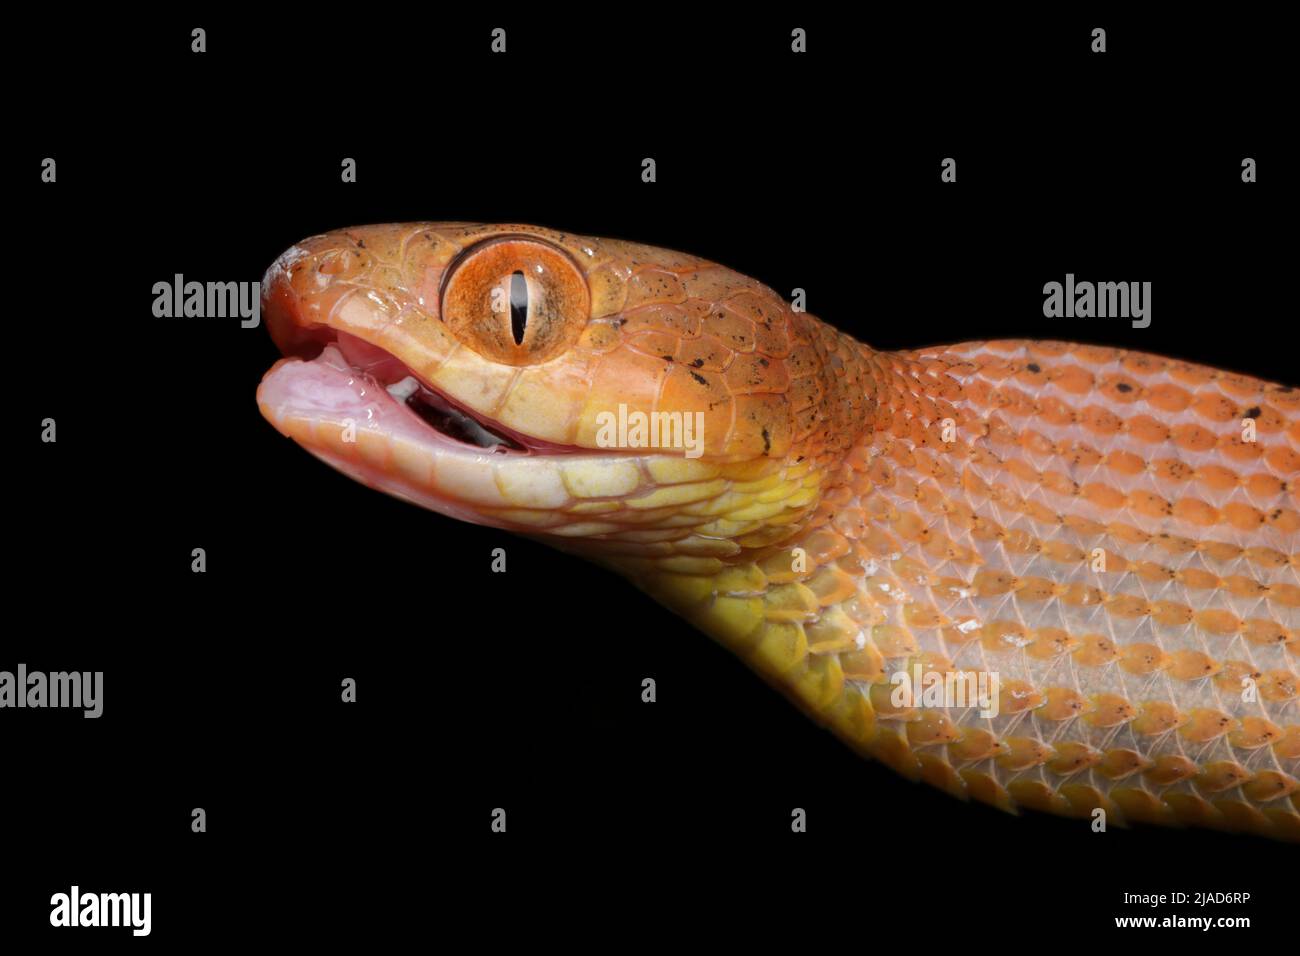 Close-Up of a juvenile Red boiga snake's head, Indonesia Stock Photo